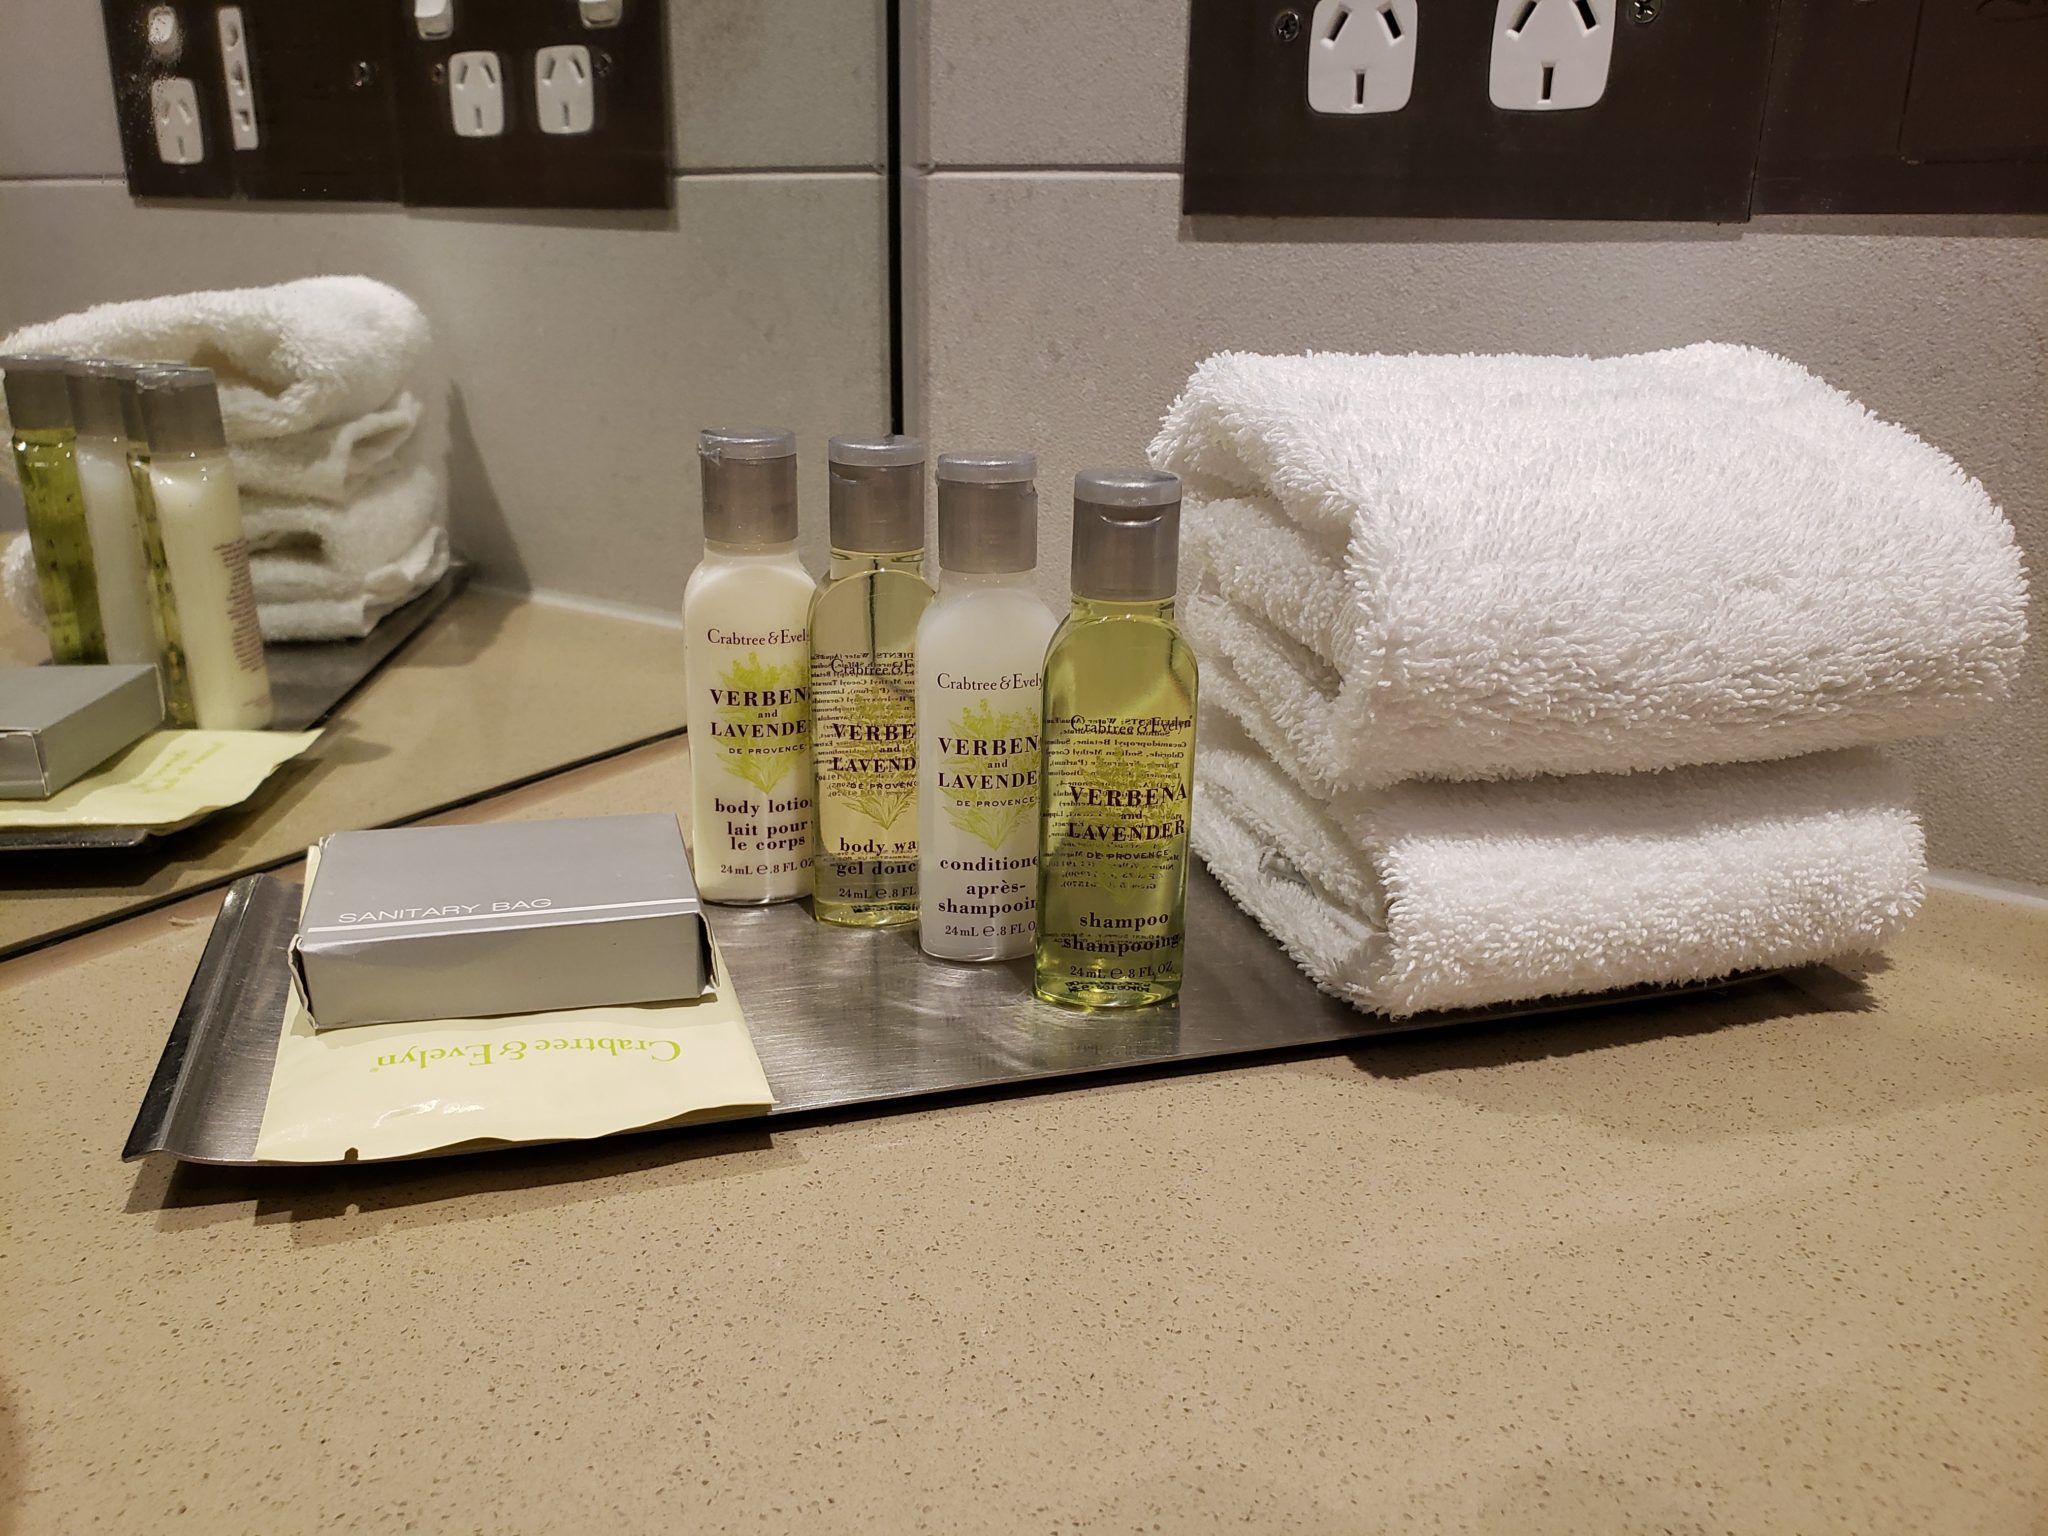 a group of small bottles of shampoo and towels